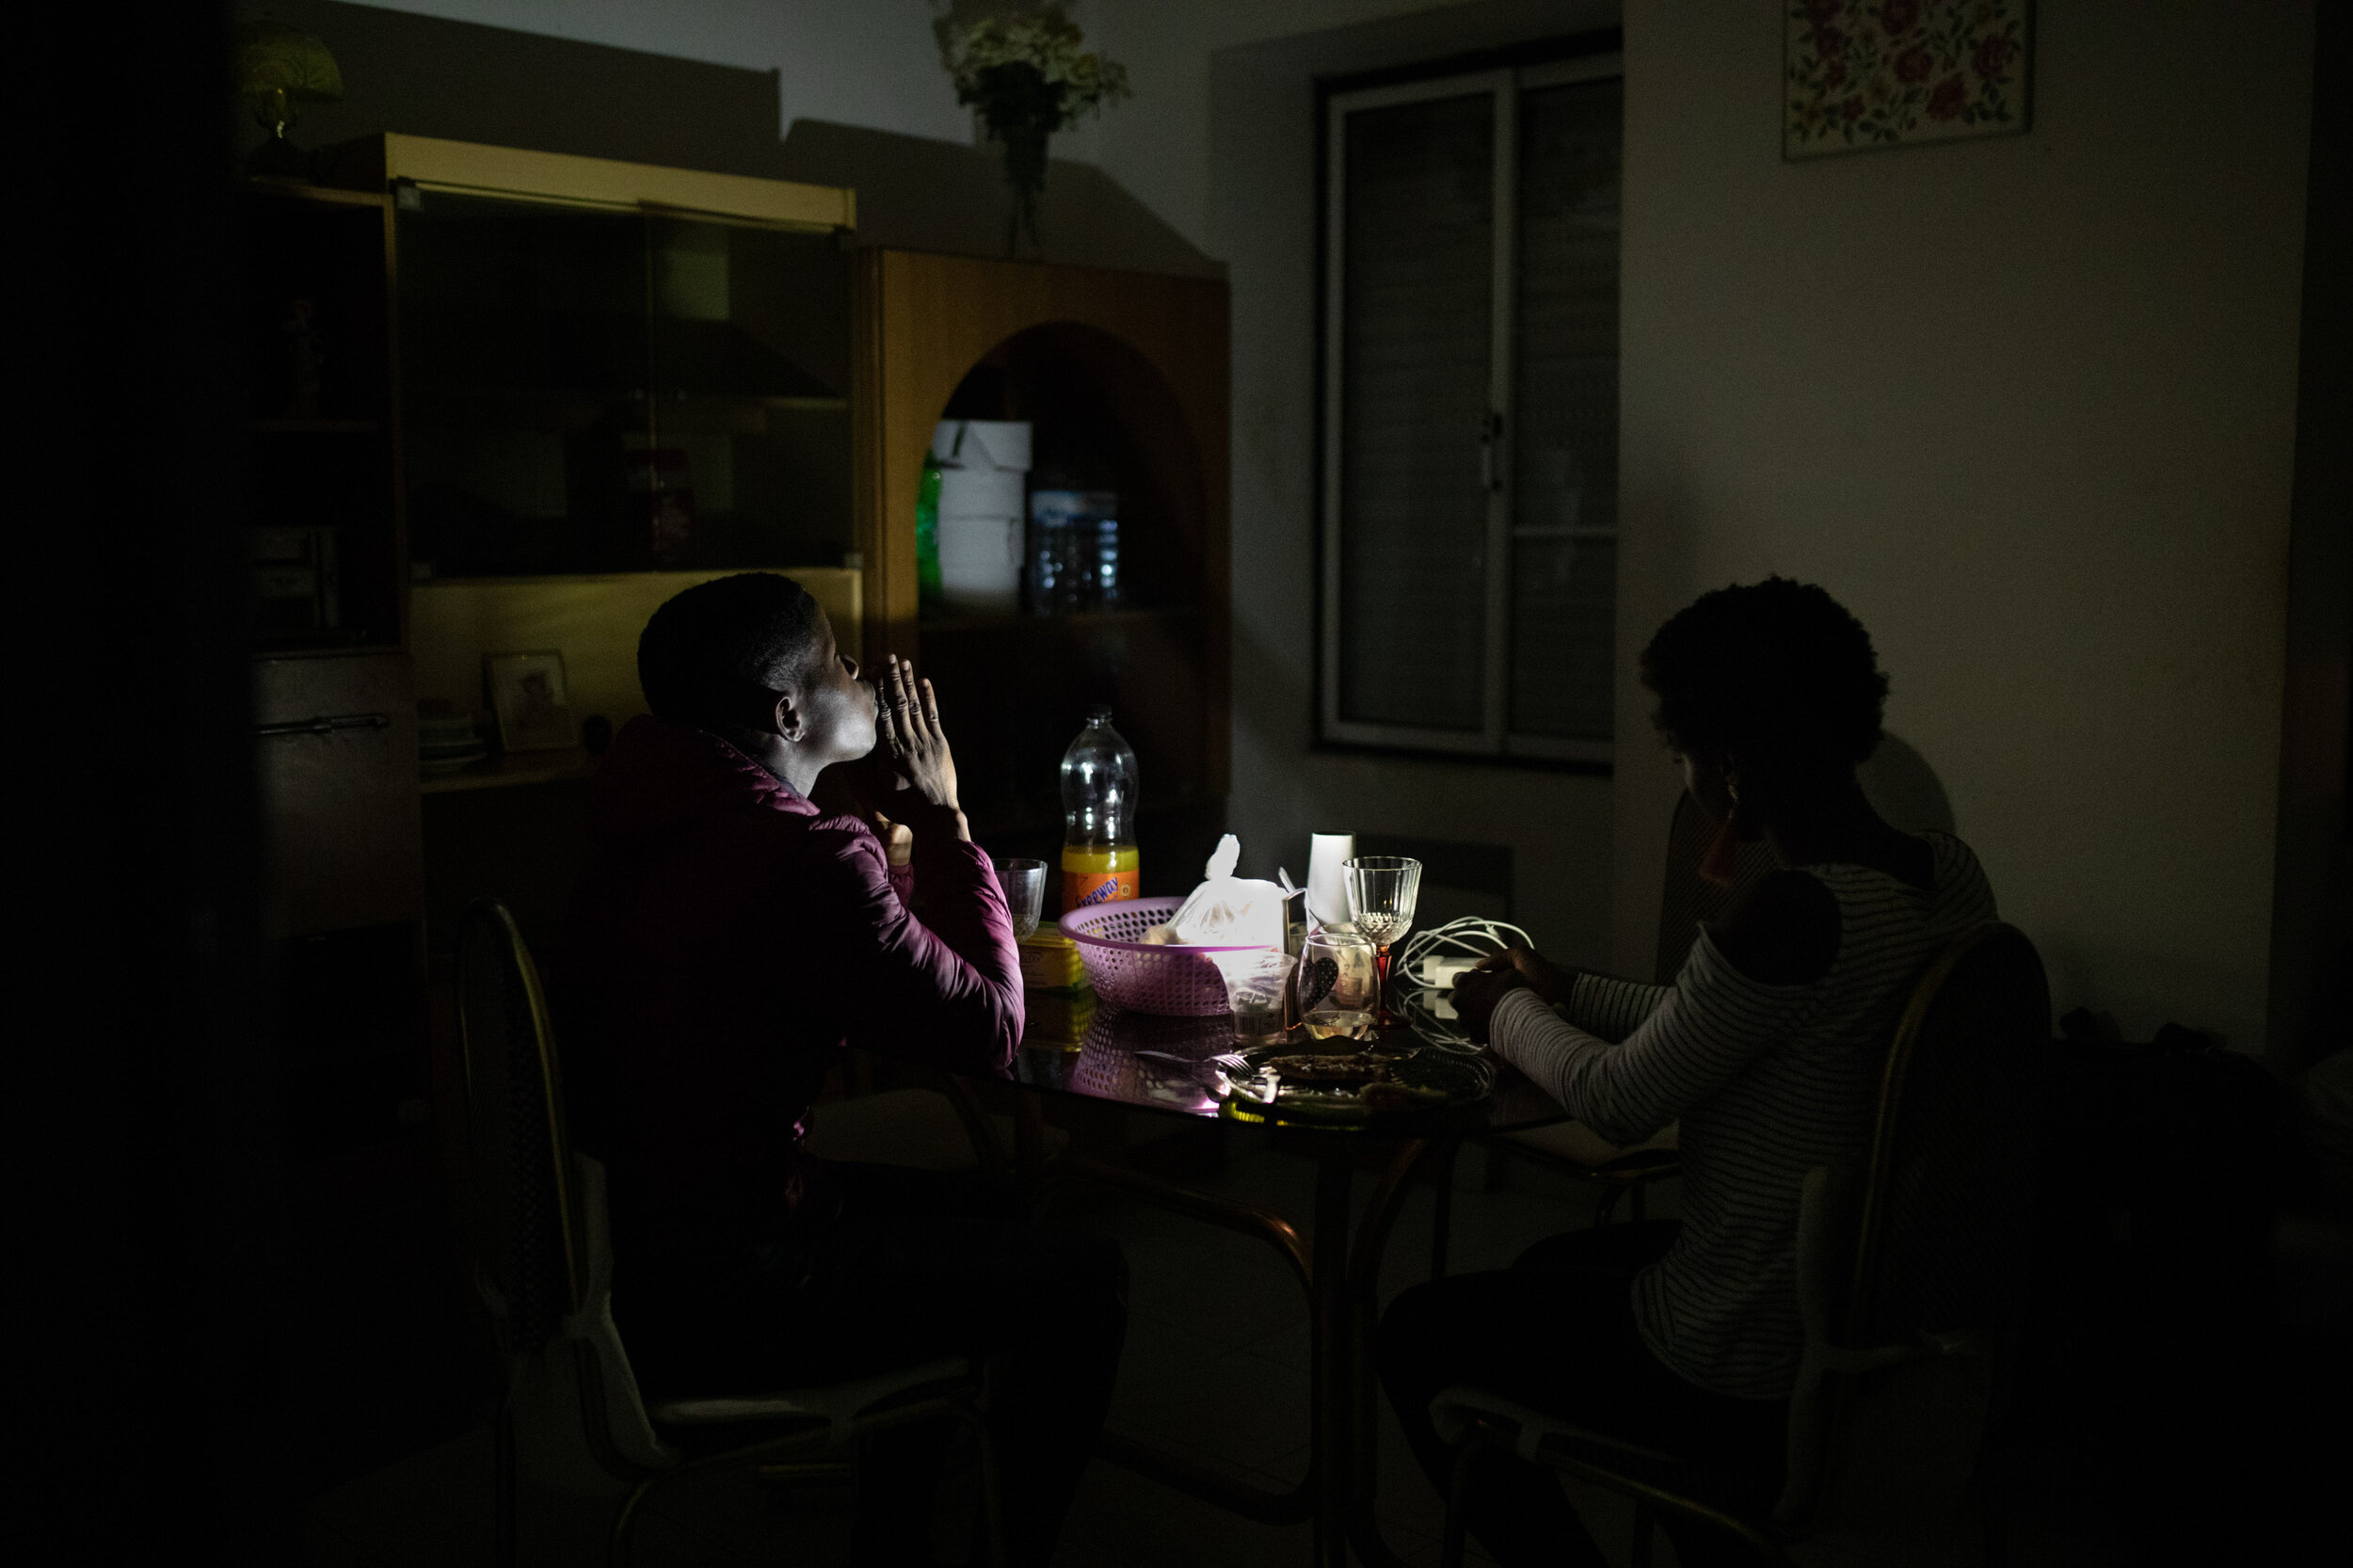  29th of May 2019   A couple have dinner at an occupied house in Lisbon after the police cut the power.   Danilson (left) and Rebeca (right), worked as a security guard and restaurant server. Struggling to pay rent in an increasingly gentrified city 